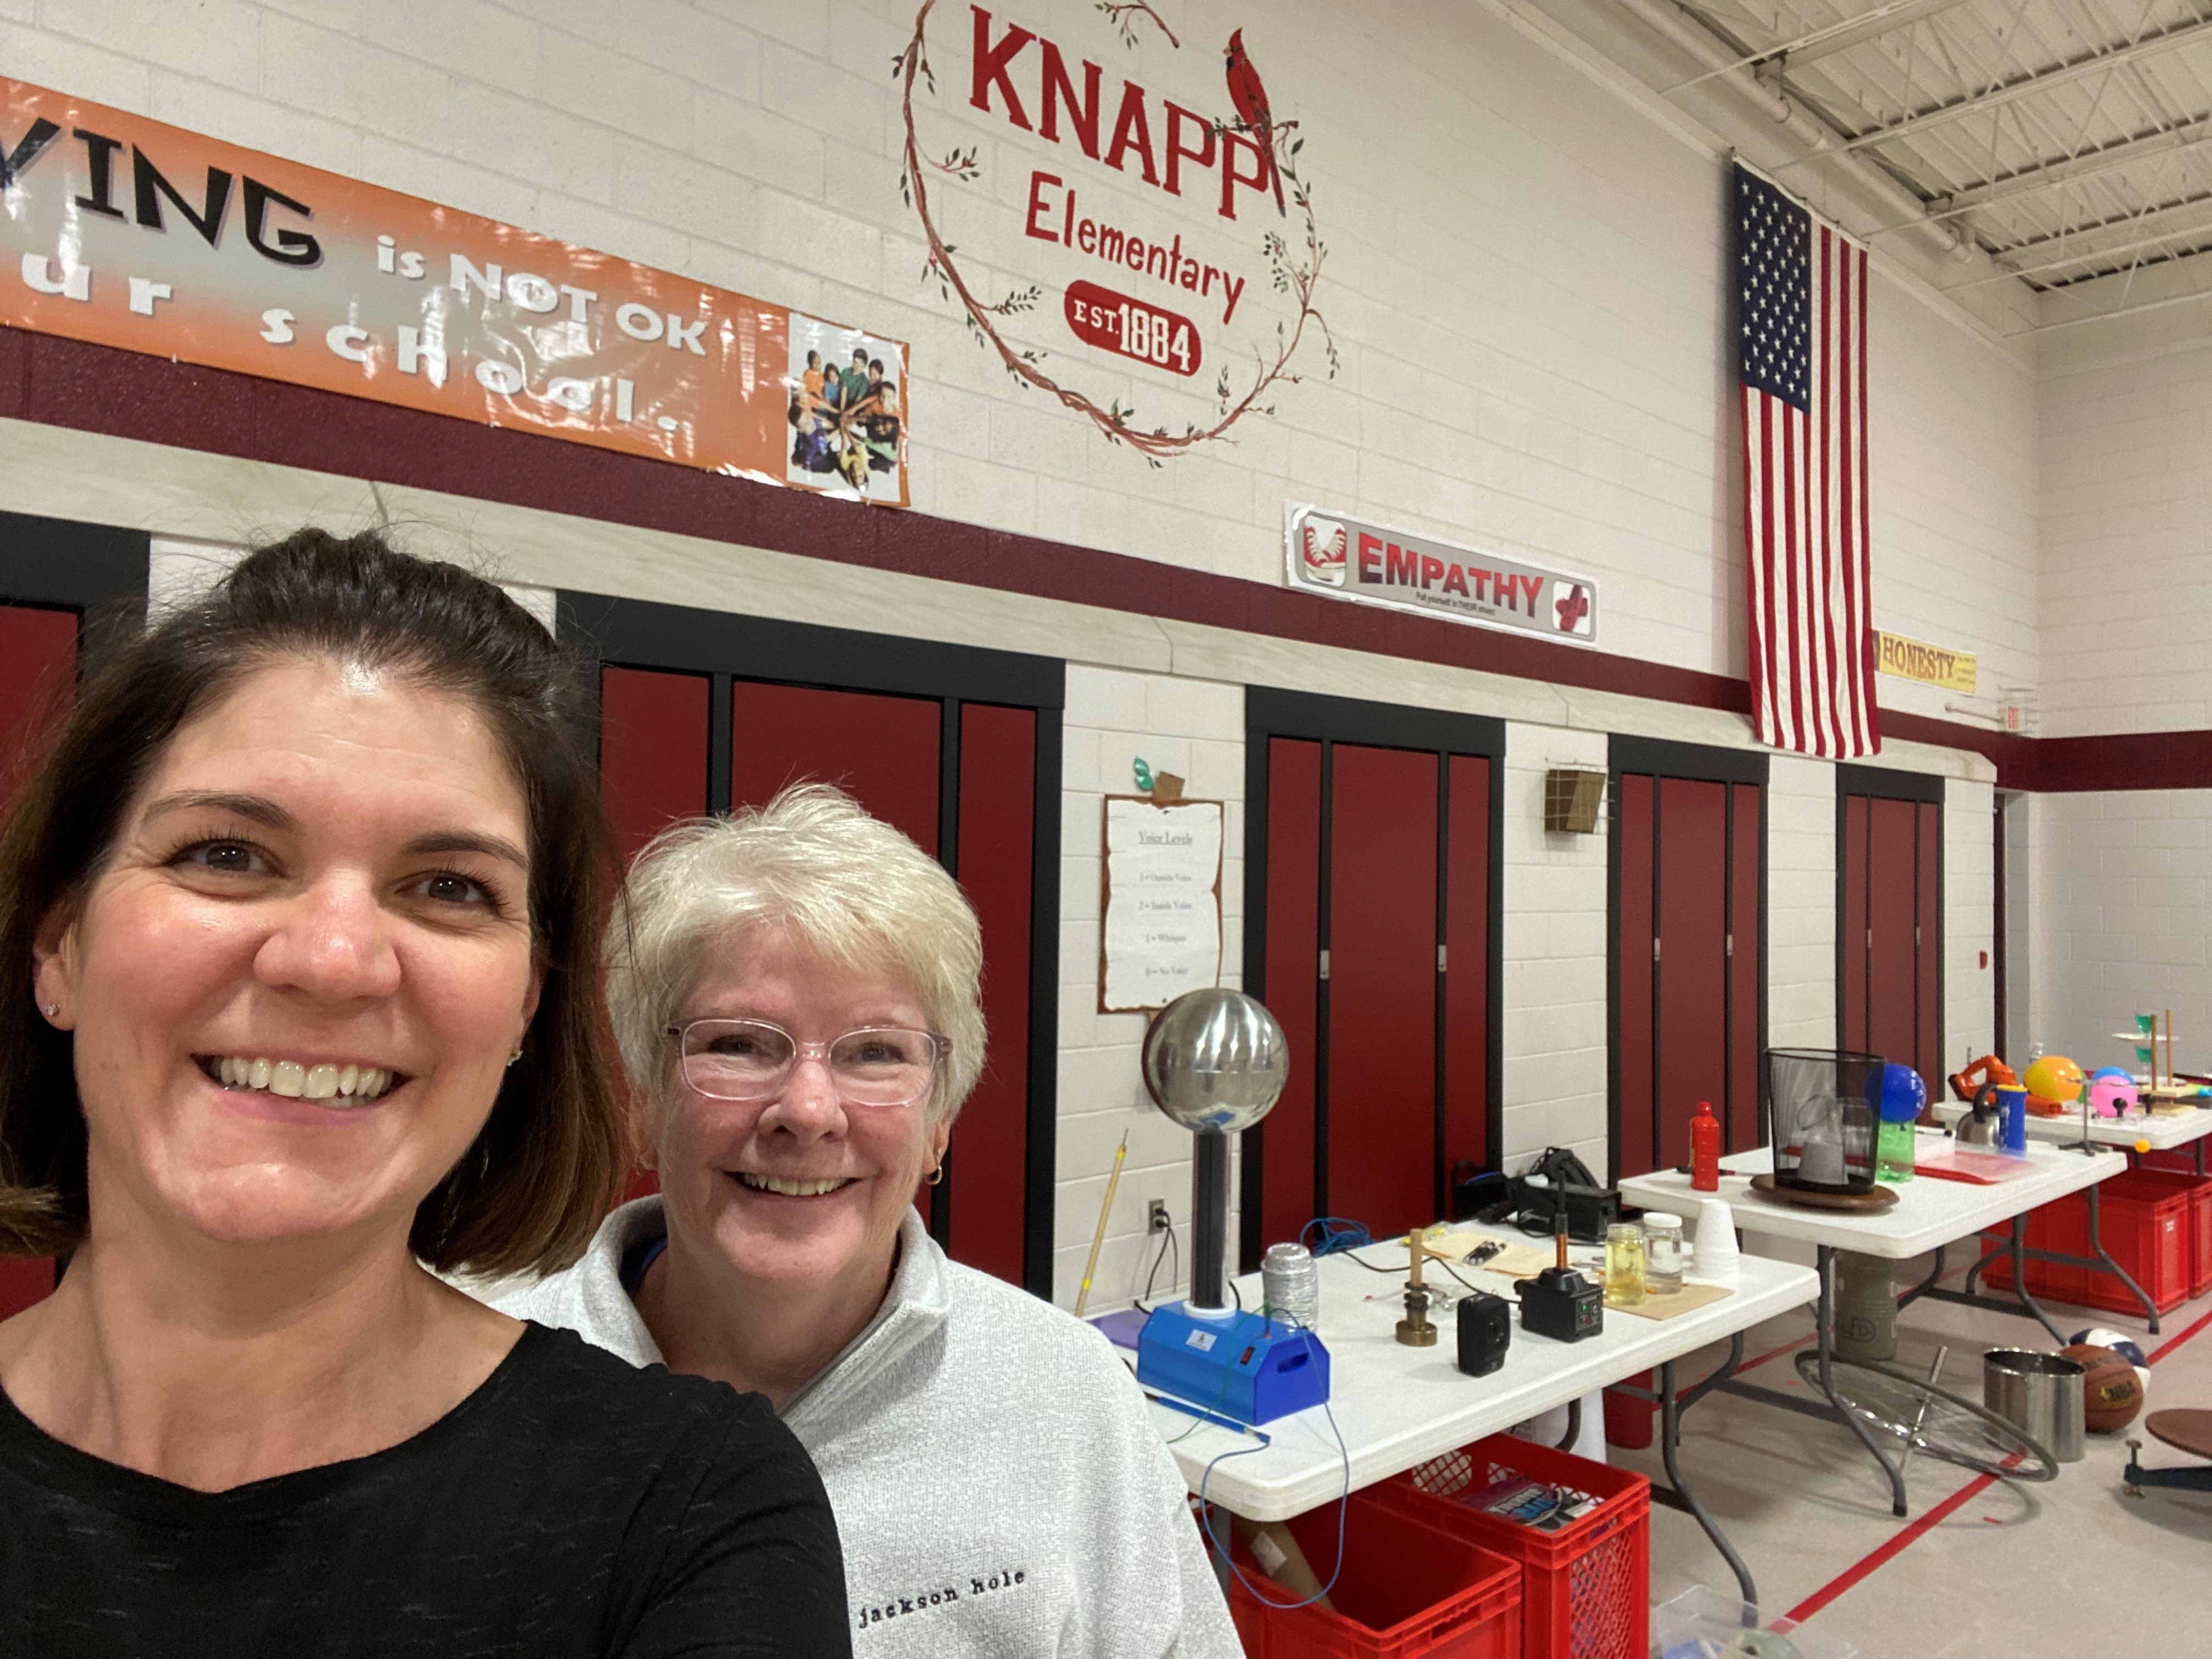 Two women stand in the side of the frame with science demos on tables behind them and a painted "Knapp Elementary" on the wall above them to indicate where they are